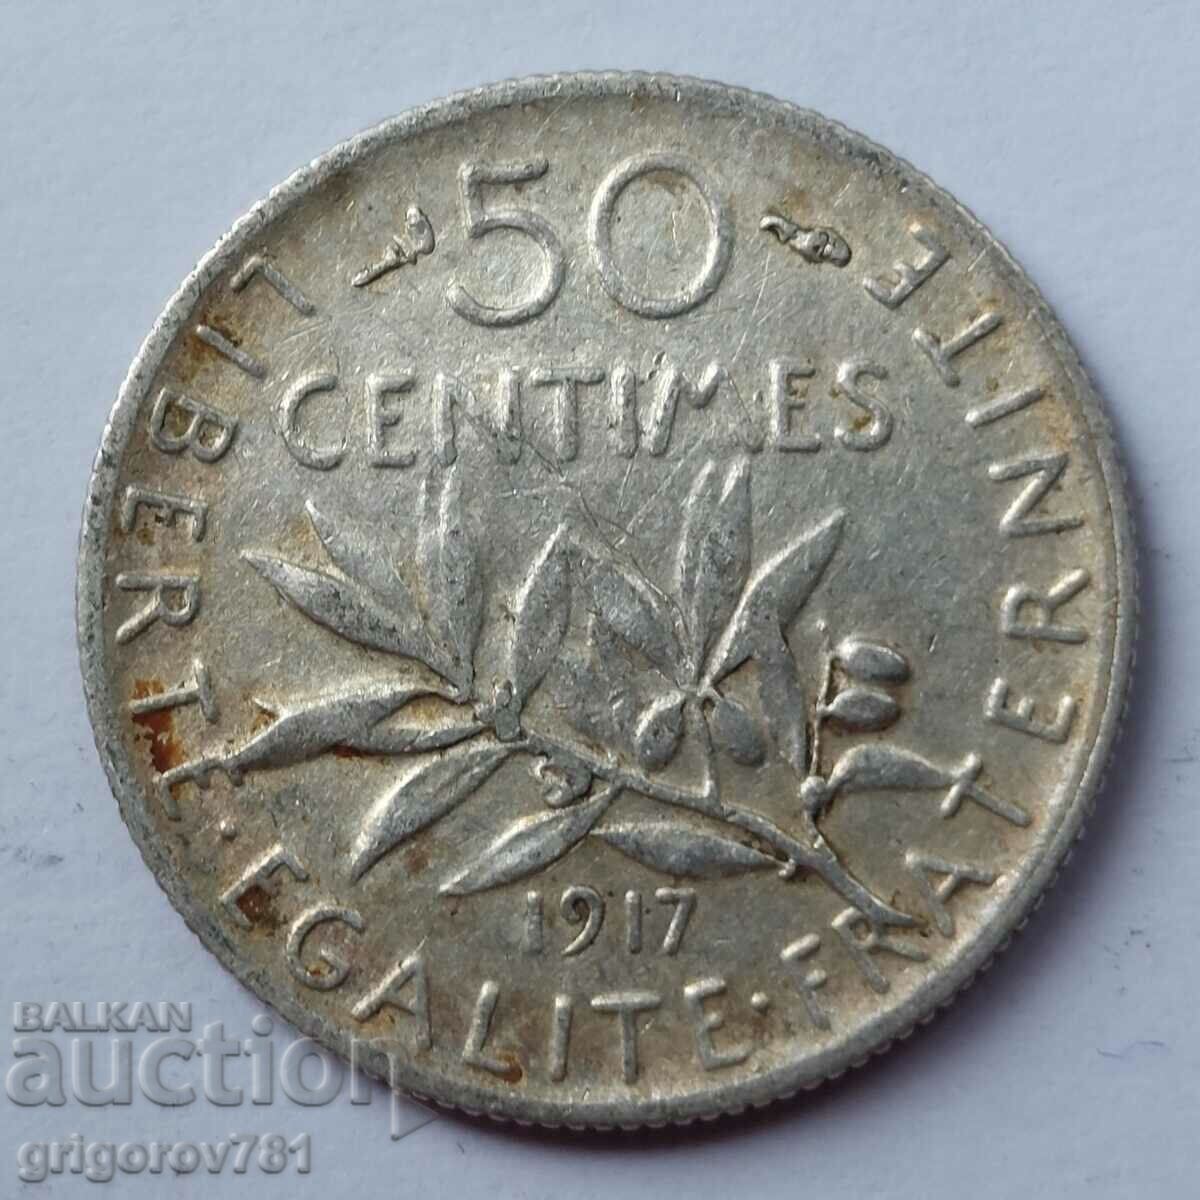 50 centimes silver France 1917 - silver coin №38